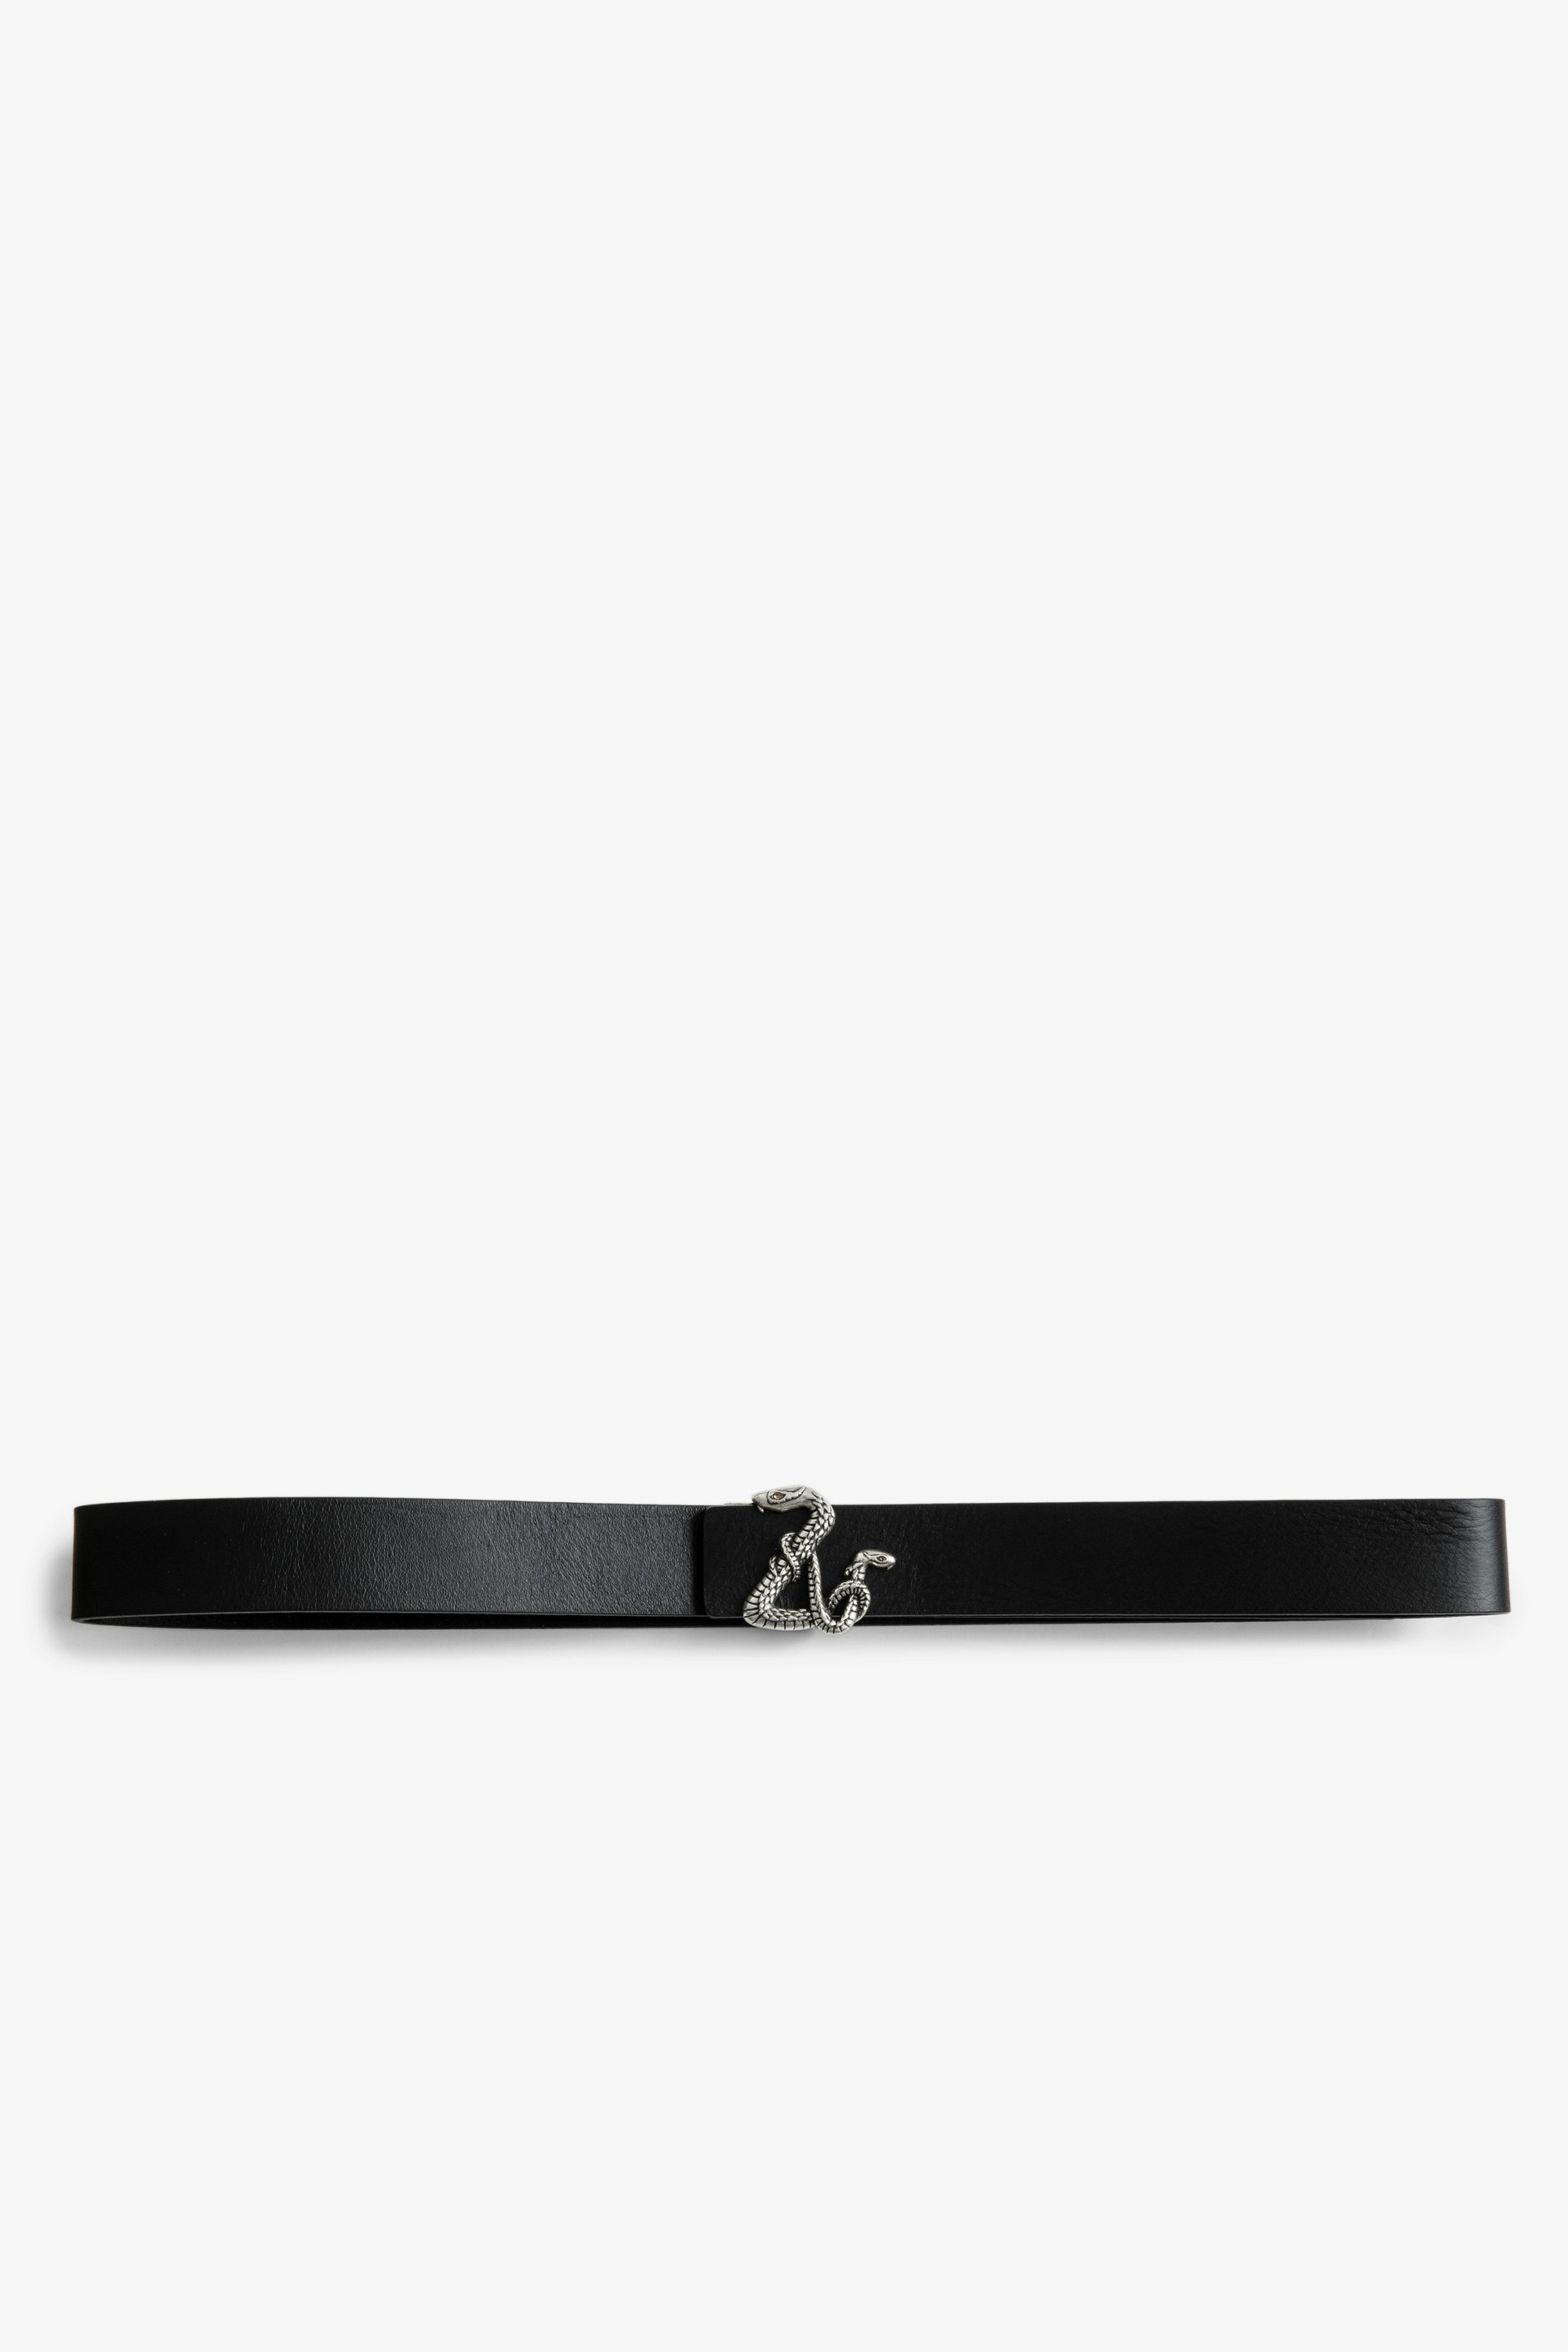 ZV Initiale Snake ベルト Women's black leather belt with ZV snake buckle